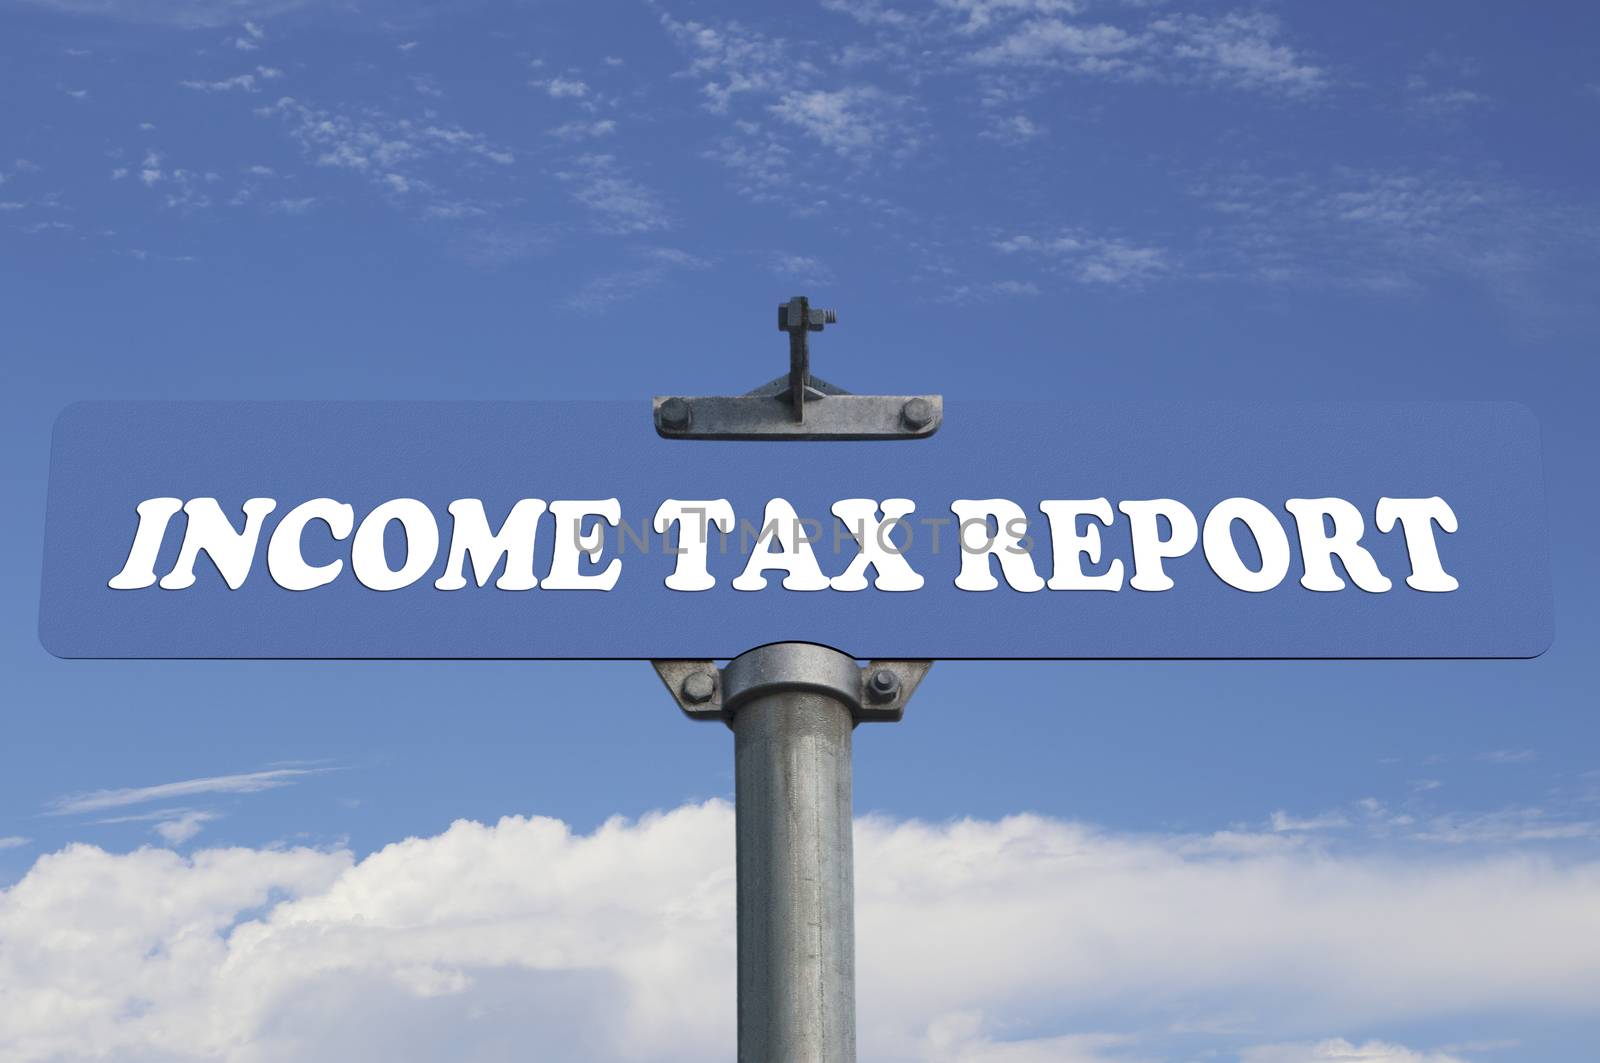 Income tax report road sign by payphoto